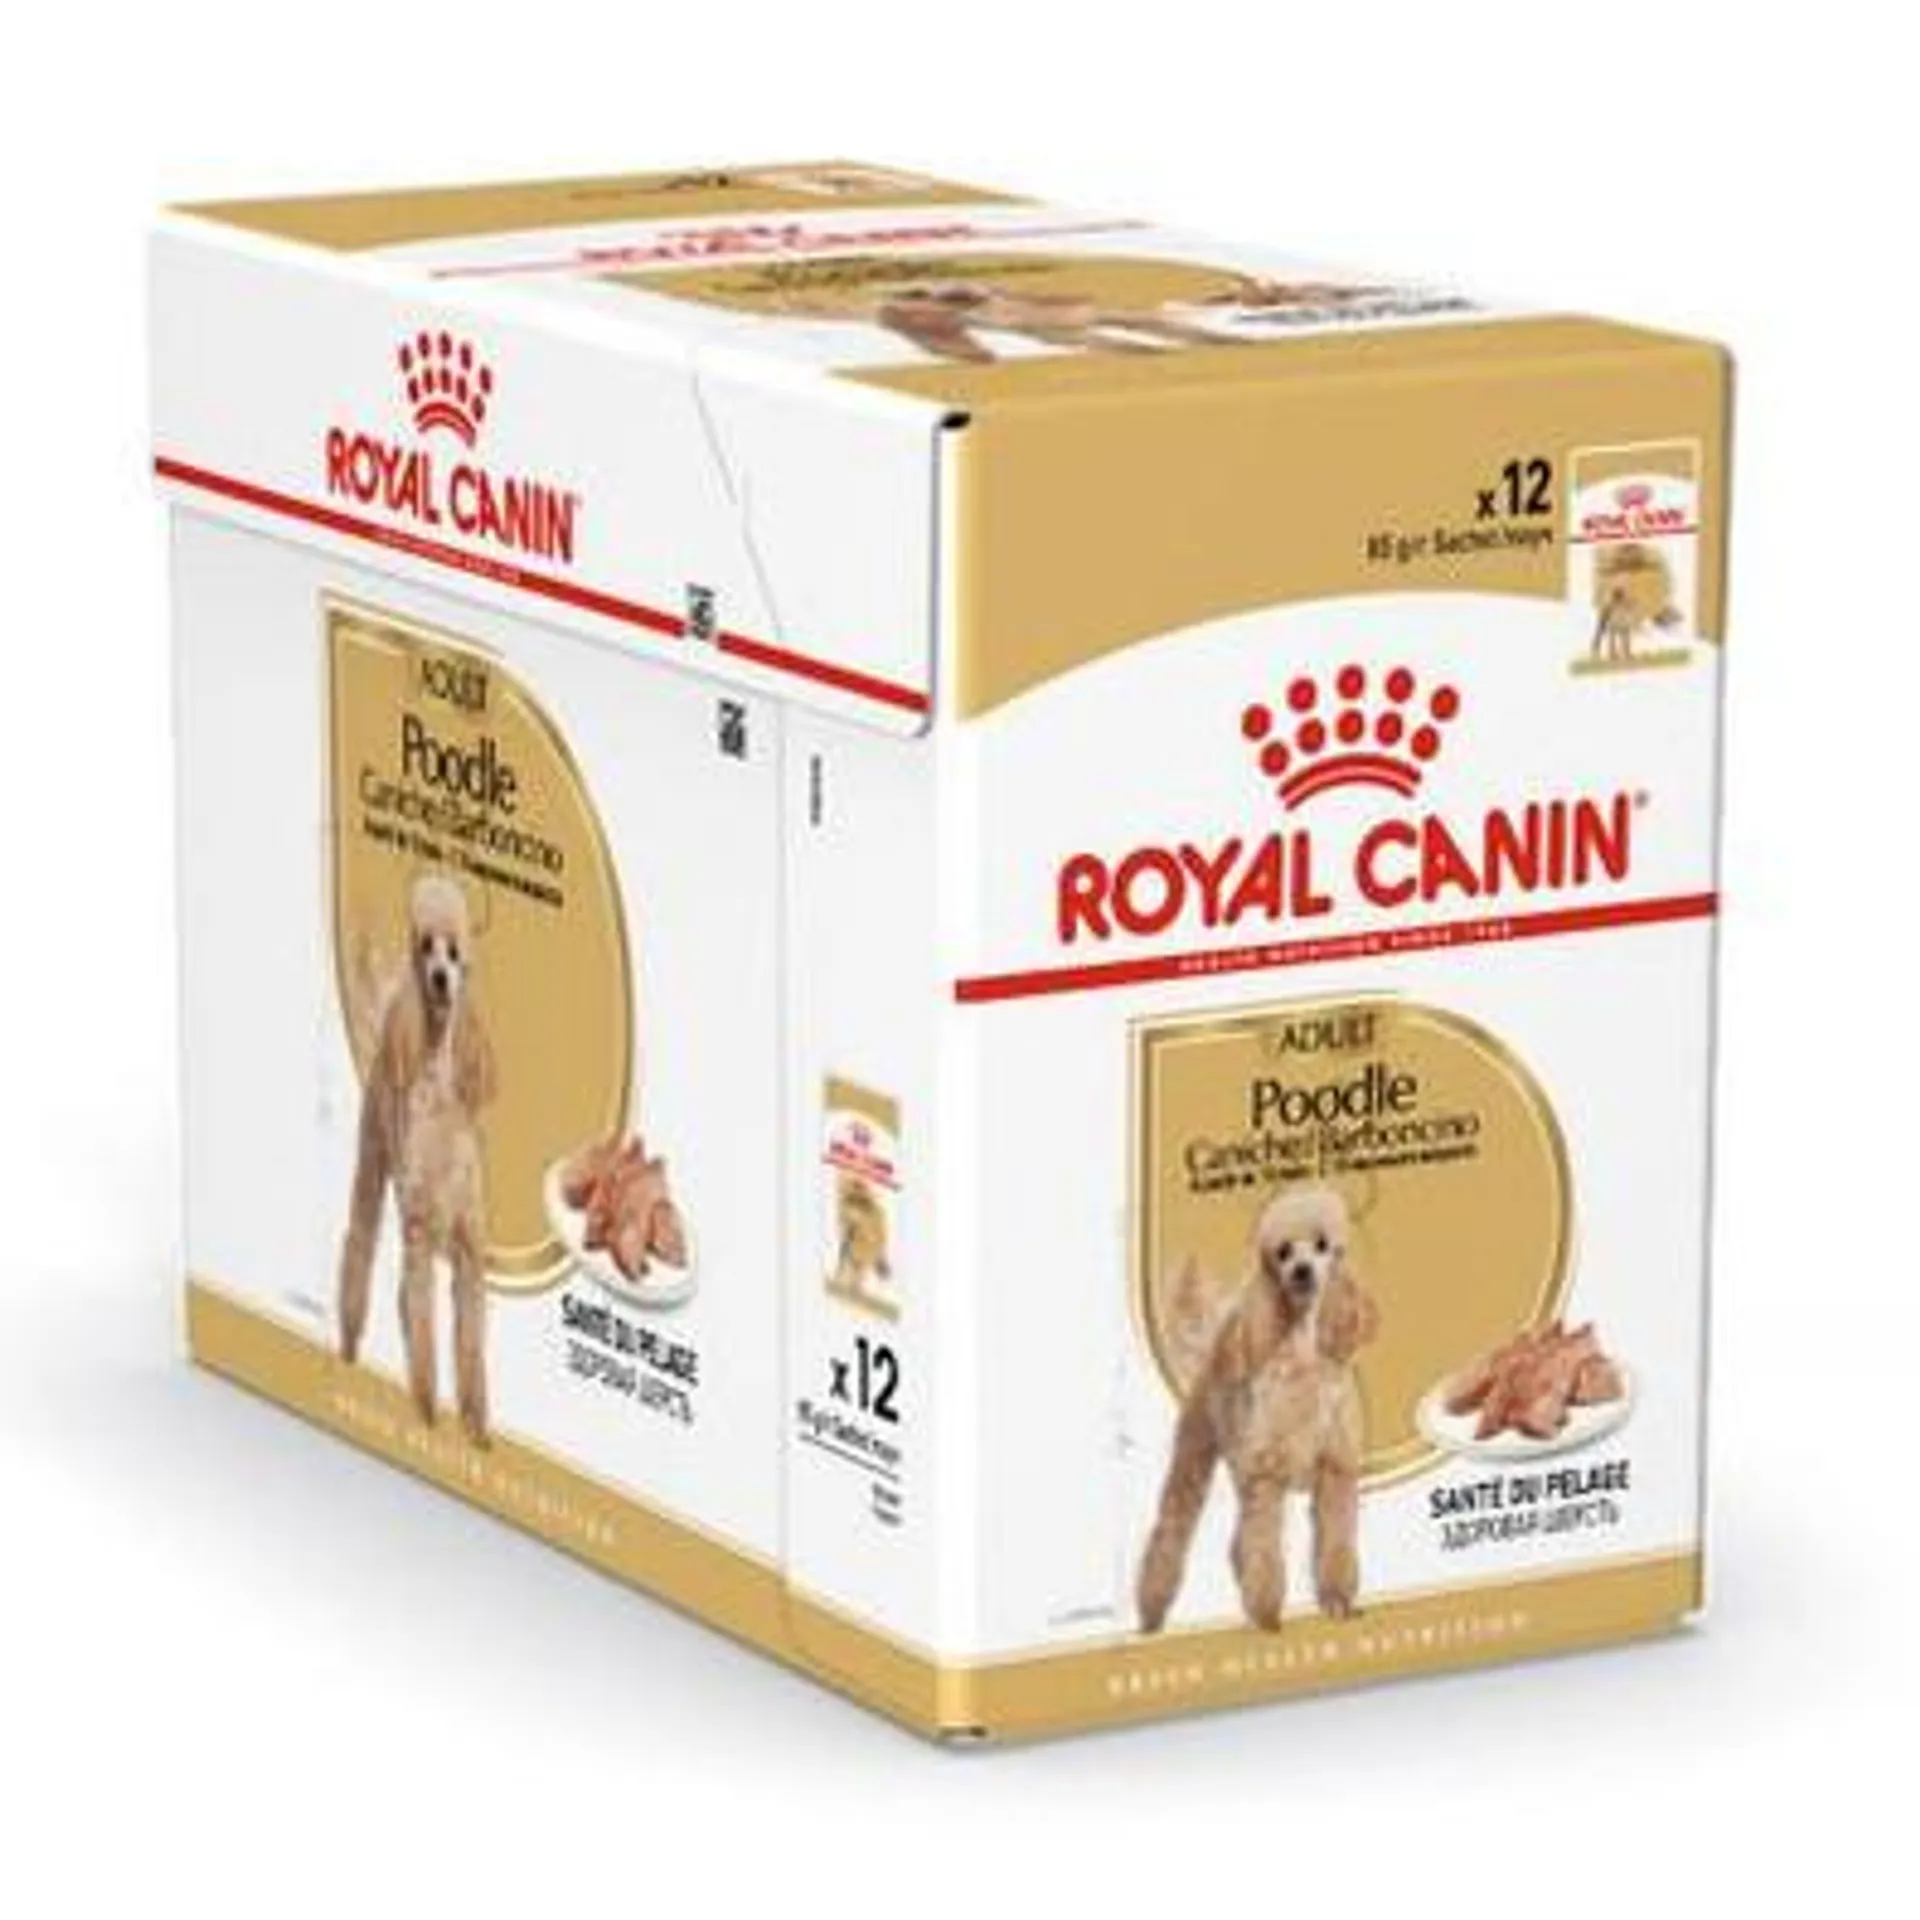 Royal Canin Poodle Adult Wet Dog Food Pouches